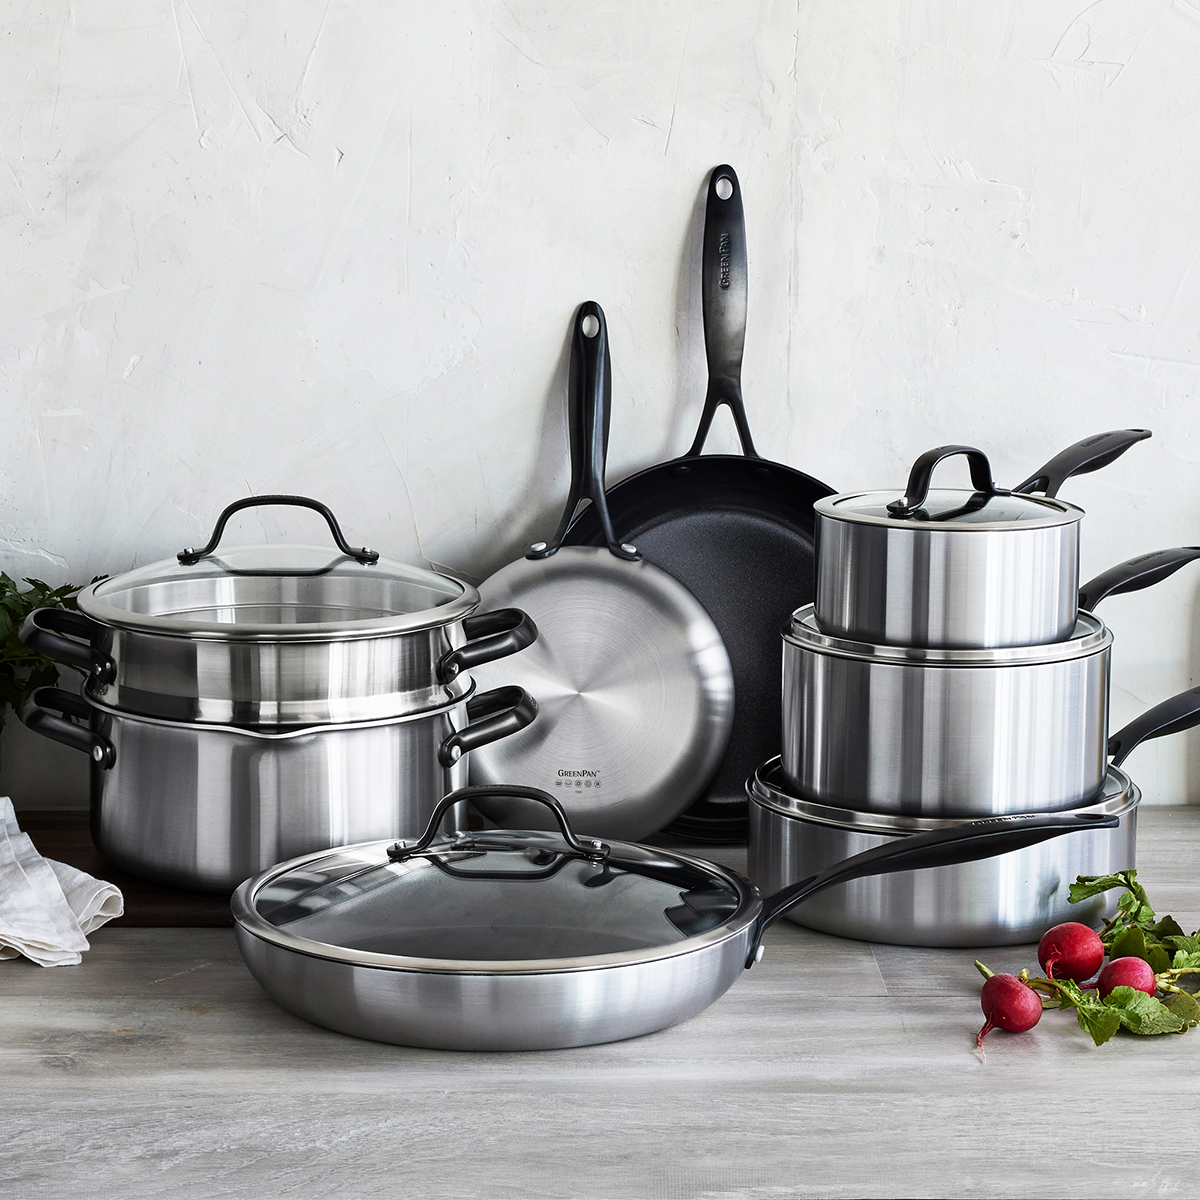 Stainless Steel: 30% Off